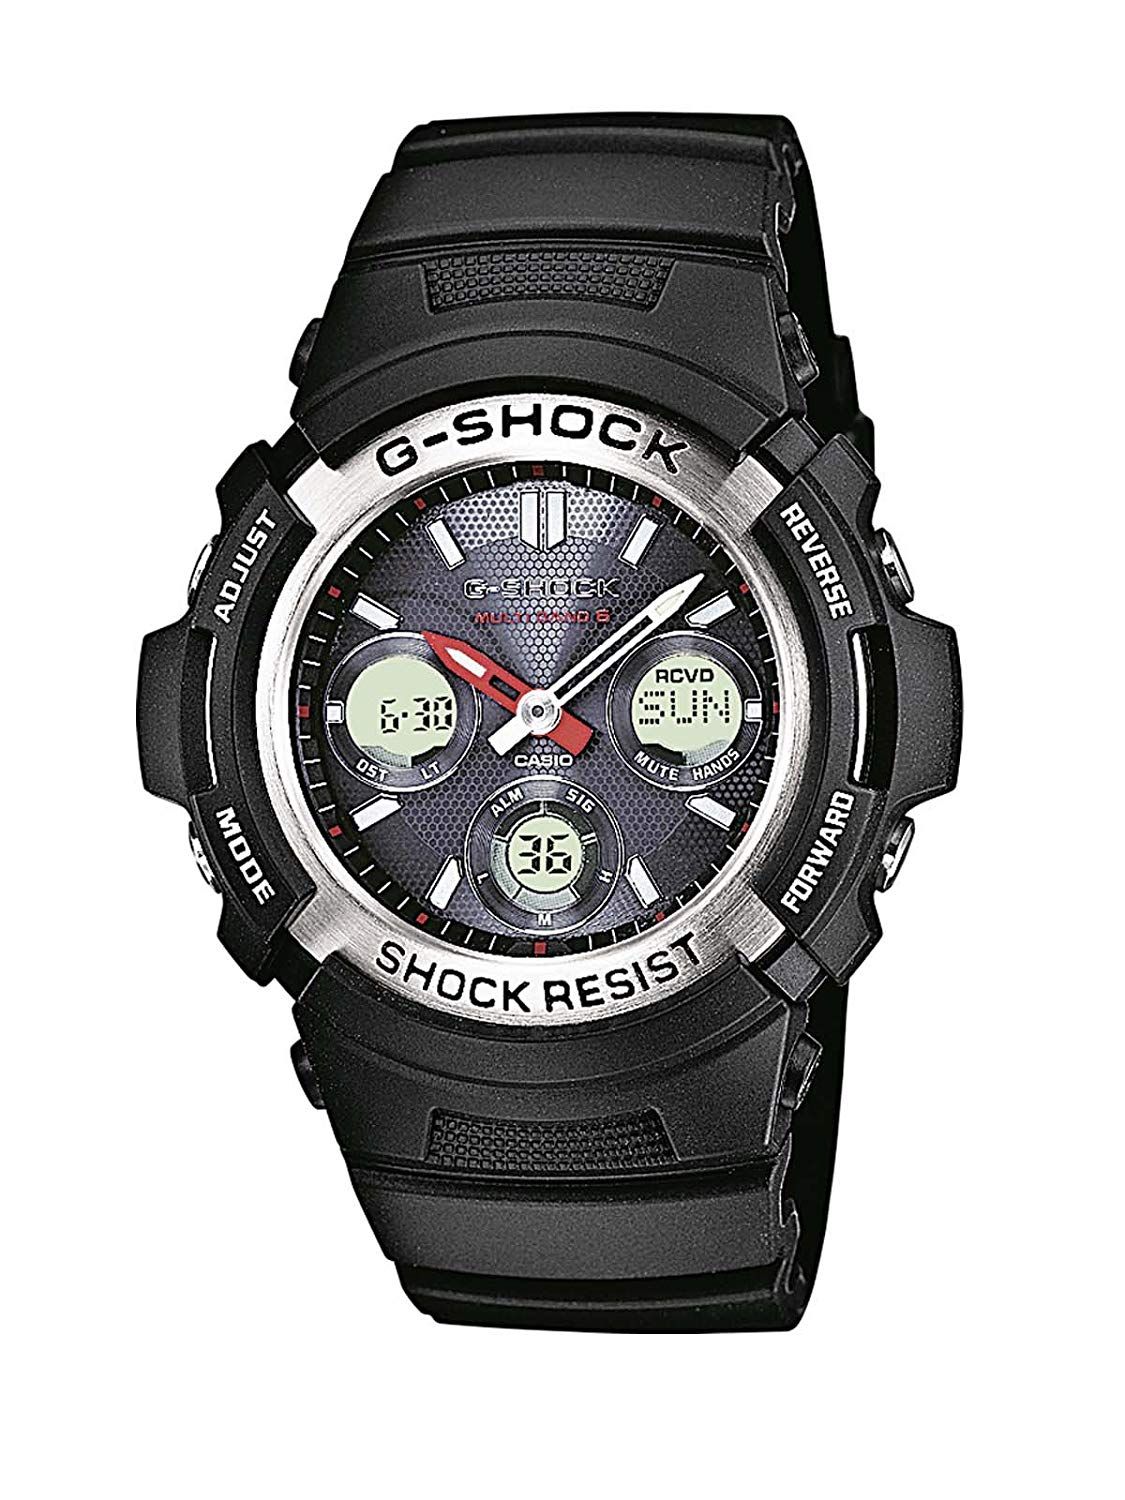 This Casio G-shock Analogue-Digital Watch for Men is the perfect timepiece to wear or to gift. It's Black 46 mm Round case combined with the comfortable Black Plastic will ensure you enjoy this stunning timepiece without any compromise. Operated by a high quality Quartz movement and water resistant to 20 bars, your watch will keep ticking. This sporty and clasical watch is perfect for every occasion!-The watch has a calendar function: Day-Date, Solar Powered, Radio Controlled, Worldtime, Timer, Alarm High quality 21 cm length, 22 mm wide Black Plastic strap with a Buckle Case diameter: 46 mm, Case height: 14 mm and Case color: Black/Dial color: Grey